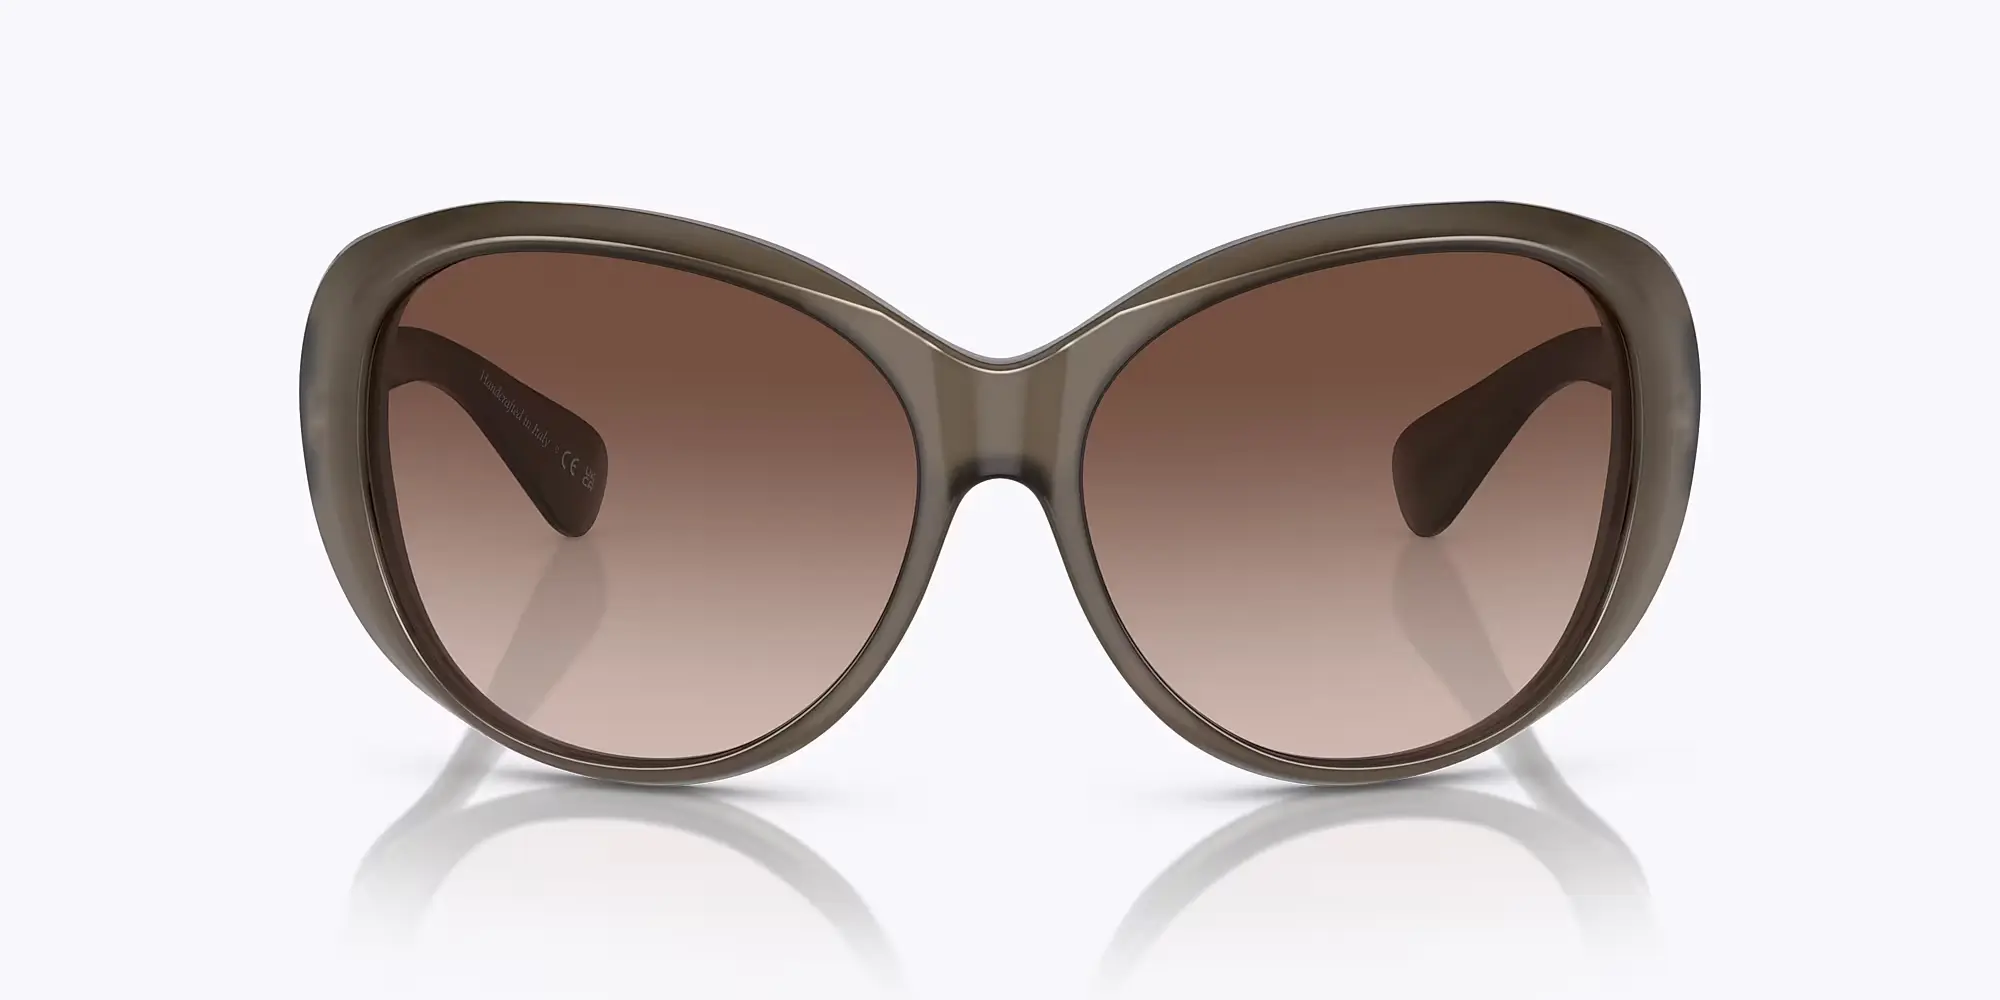 Maridan glasses by Oliver Peoples